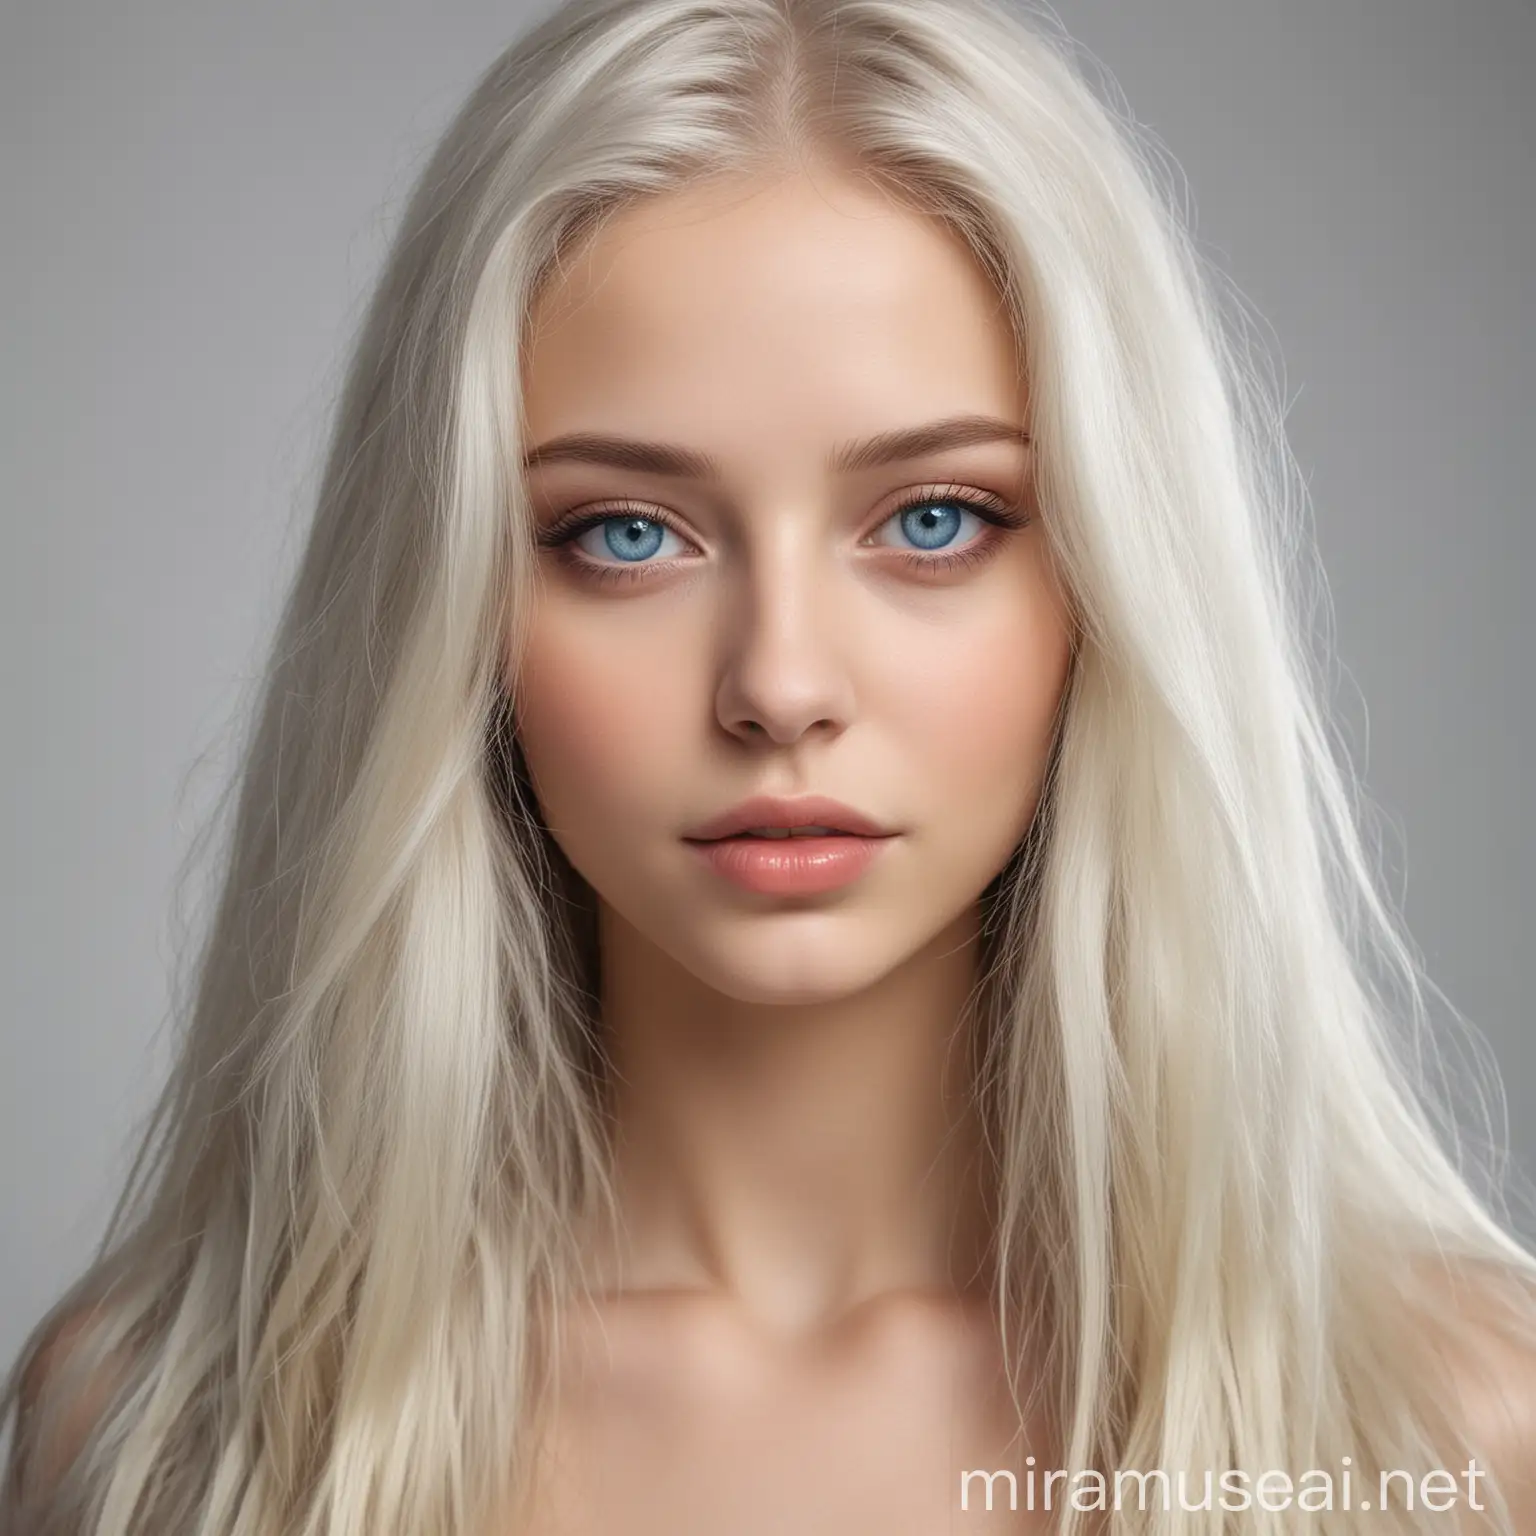 Platinum Blonde Girl with GrayBlue Eyes and Long Hair Portrait